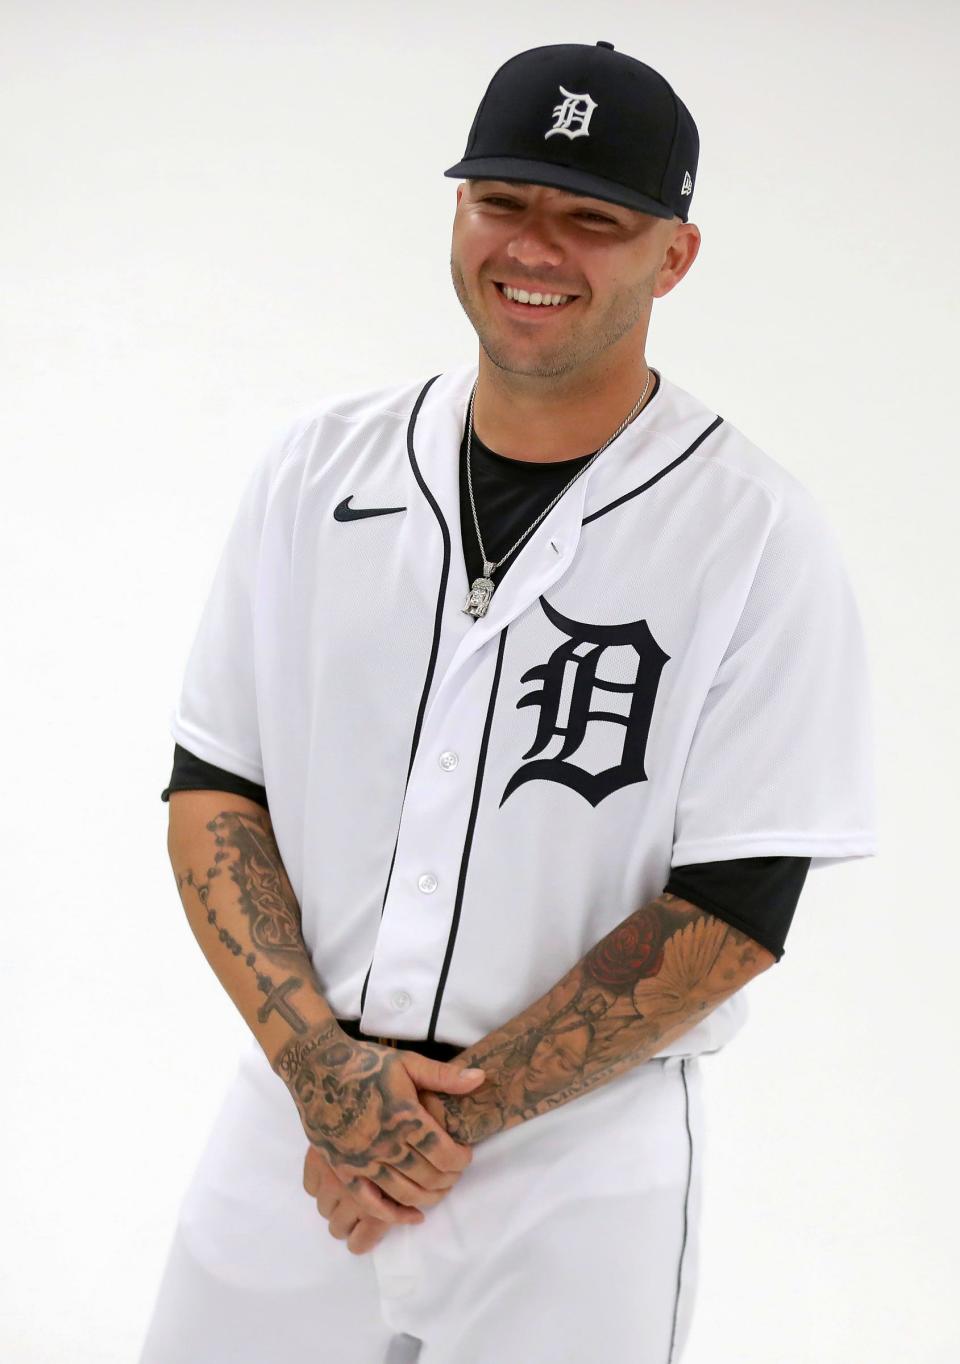 Detroit Tigers catcher Donny Sands poses during picture day at Spring Training Sunday, February 19, 2023.  Sands has summarized his life story in tattoos and has dealt with the loss of friends and family his moms name and the date his dad passed away tatted on his arms along with rosary hanging over a skull with the word Blessed are some of the tattoos he has.